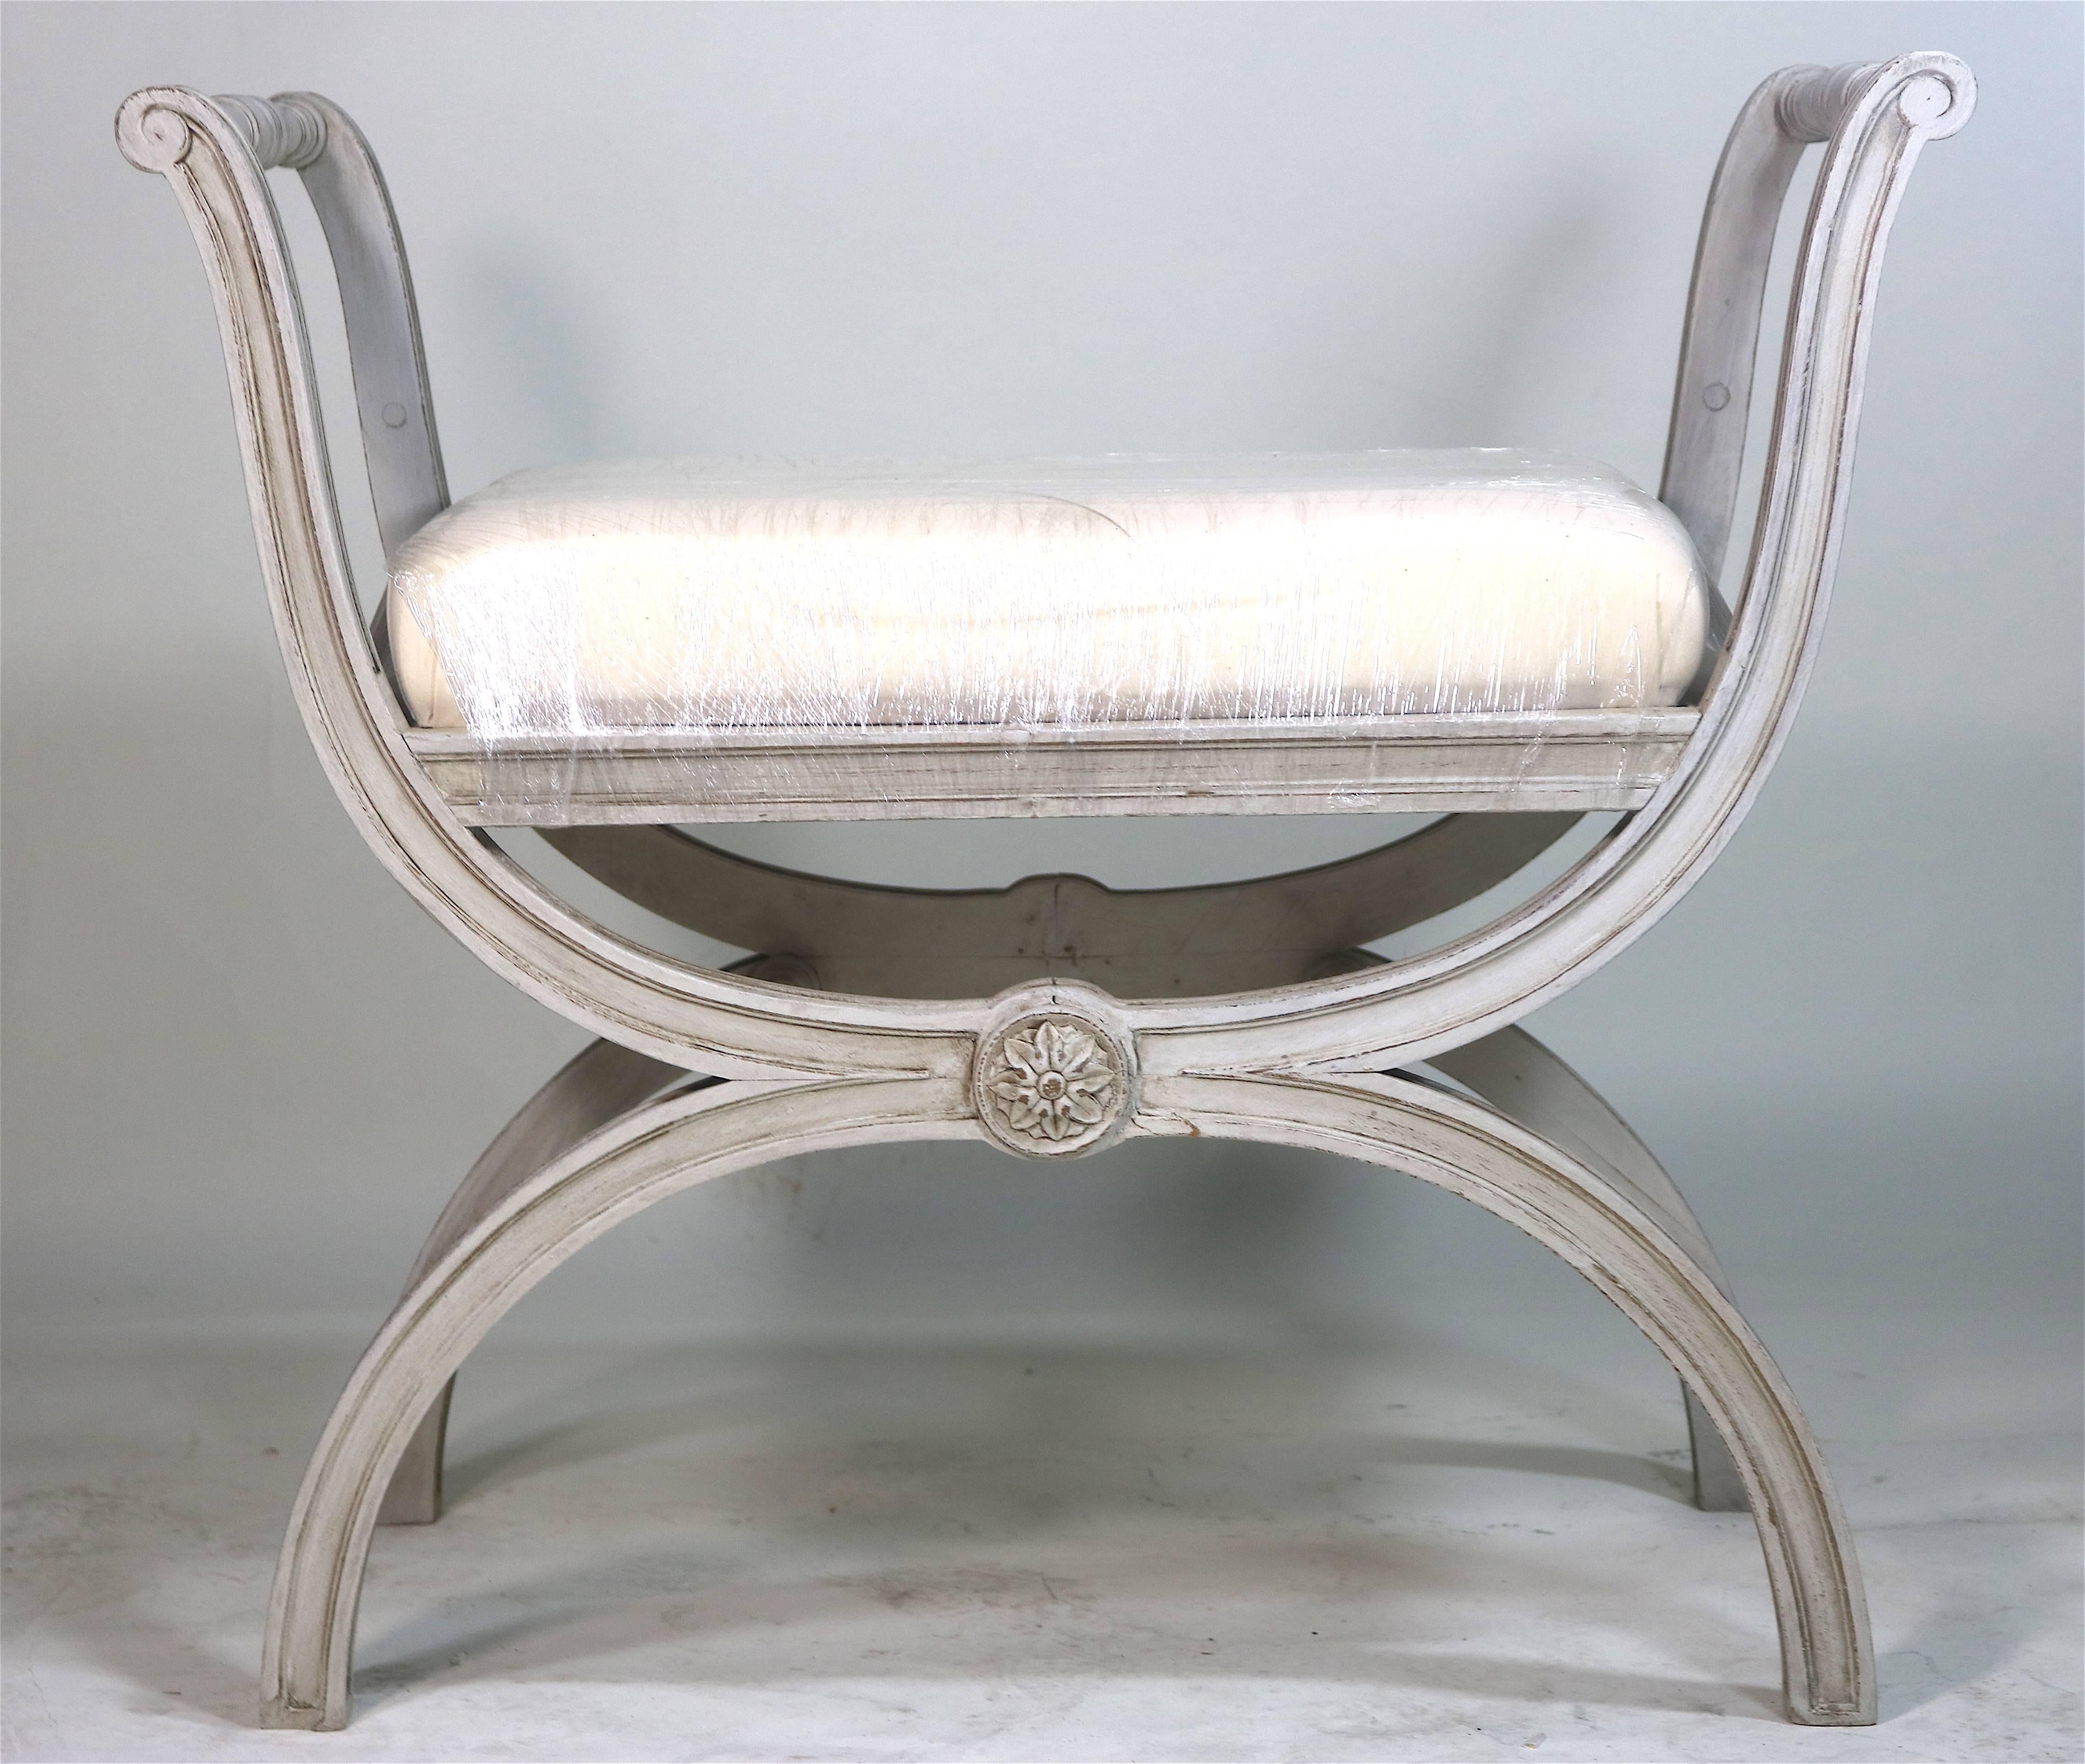 Gustavian painted Curule bench, hand-carved spindle side rails, seat rail carvings with wonderful decorative classical details, circa 1890-1900. Beautifully shaped X-base and tall side rails create a most inspired well proportioned design for your